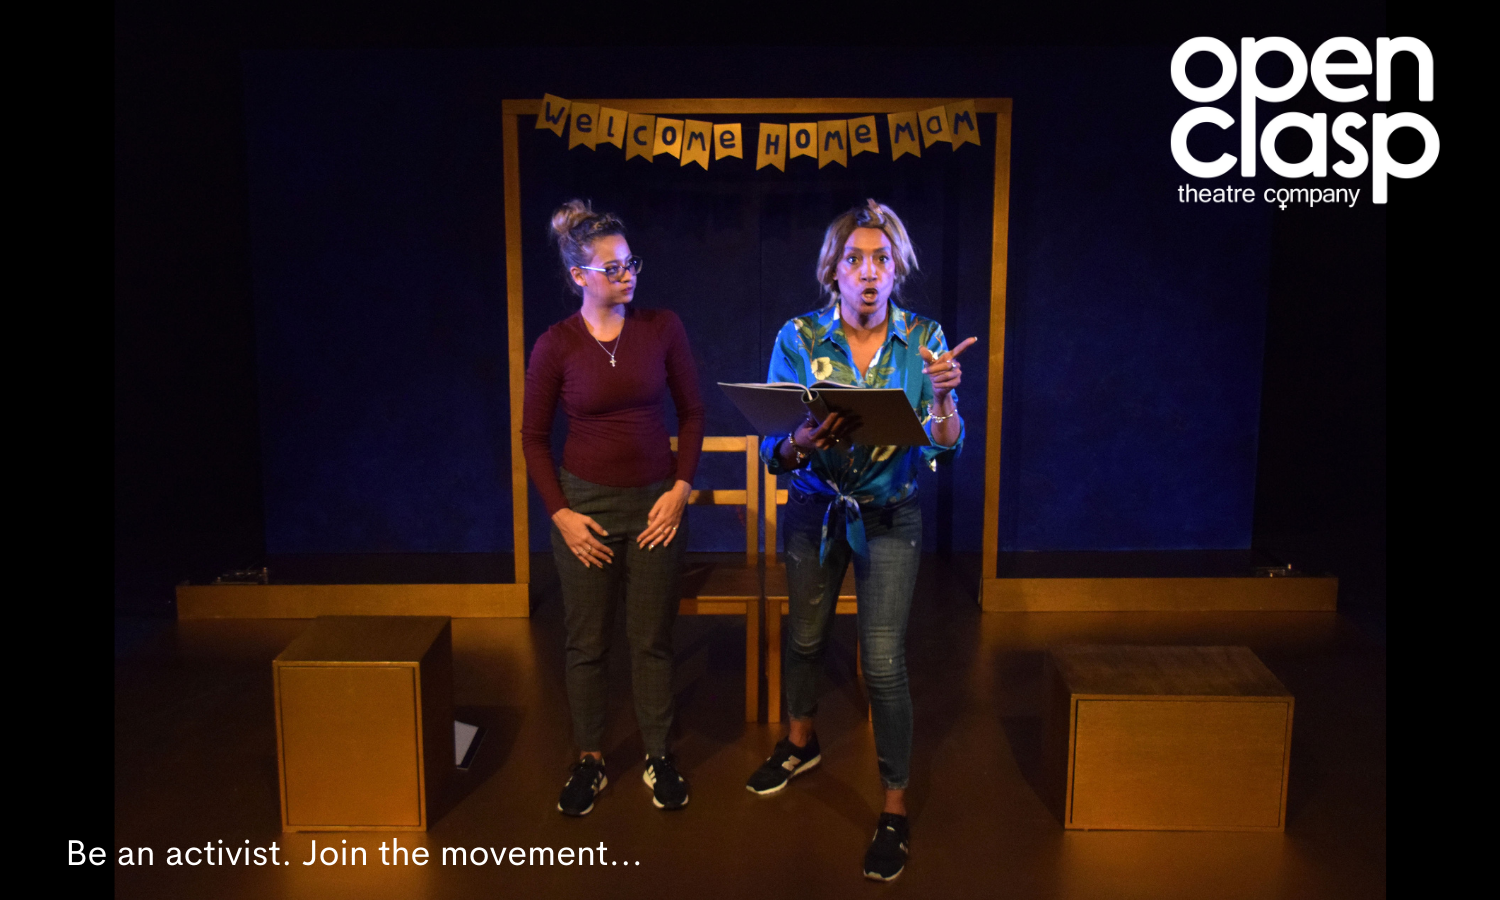 Two women on a stage. Woman on the right is holding an open book. Text bottom left says 'Be an activist. Join the movement.'